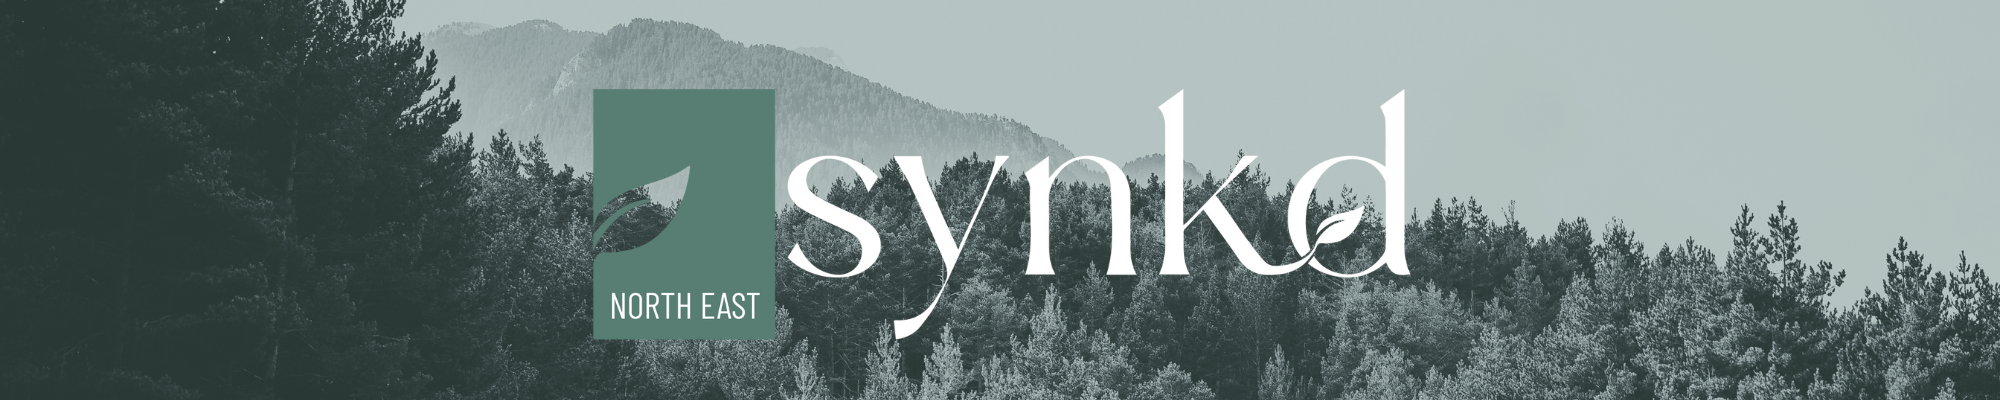 SYNKD is connecting the northeast landscaping industry through its quarterly publications